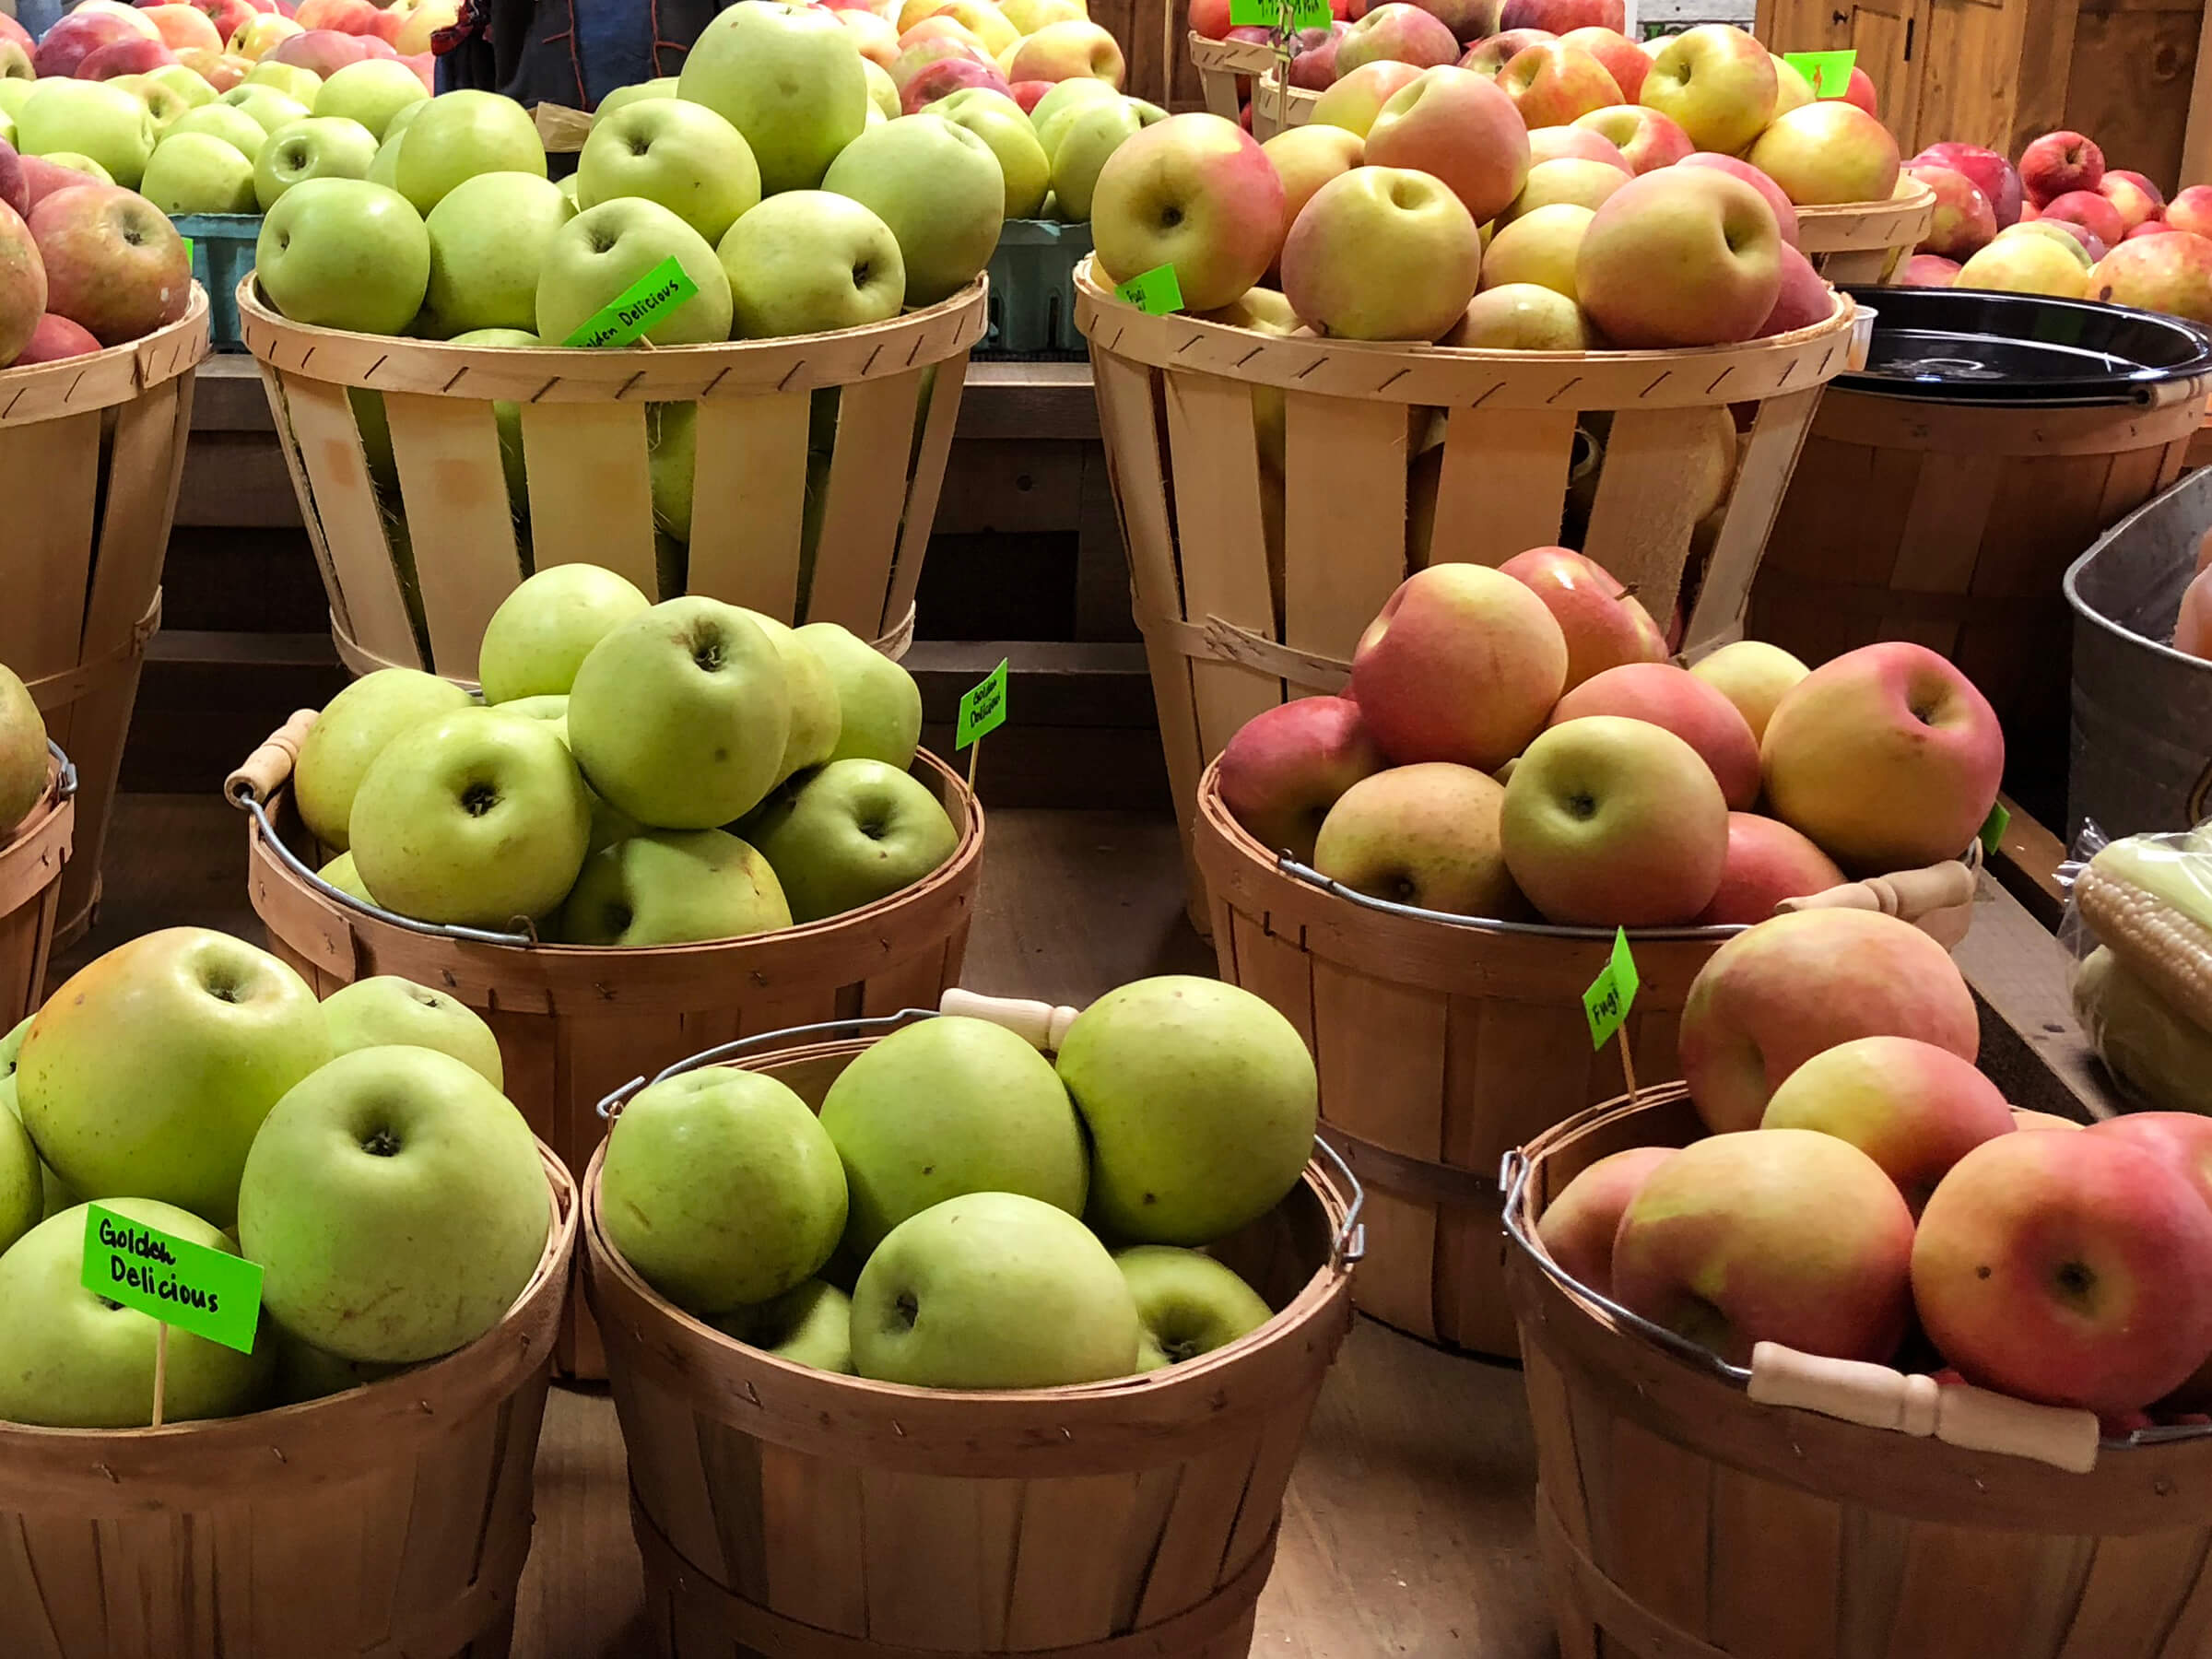 Baskets of Apples Grown in PA for Sale at The Markets